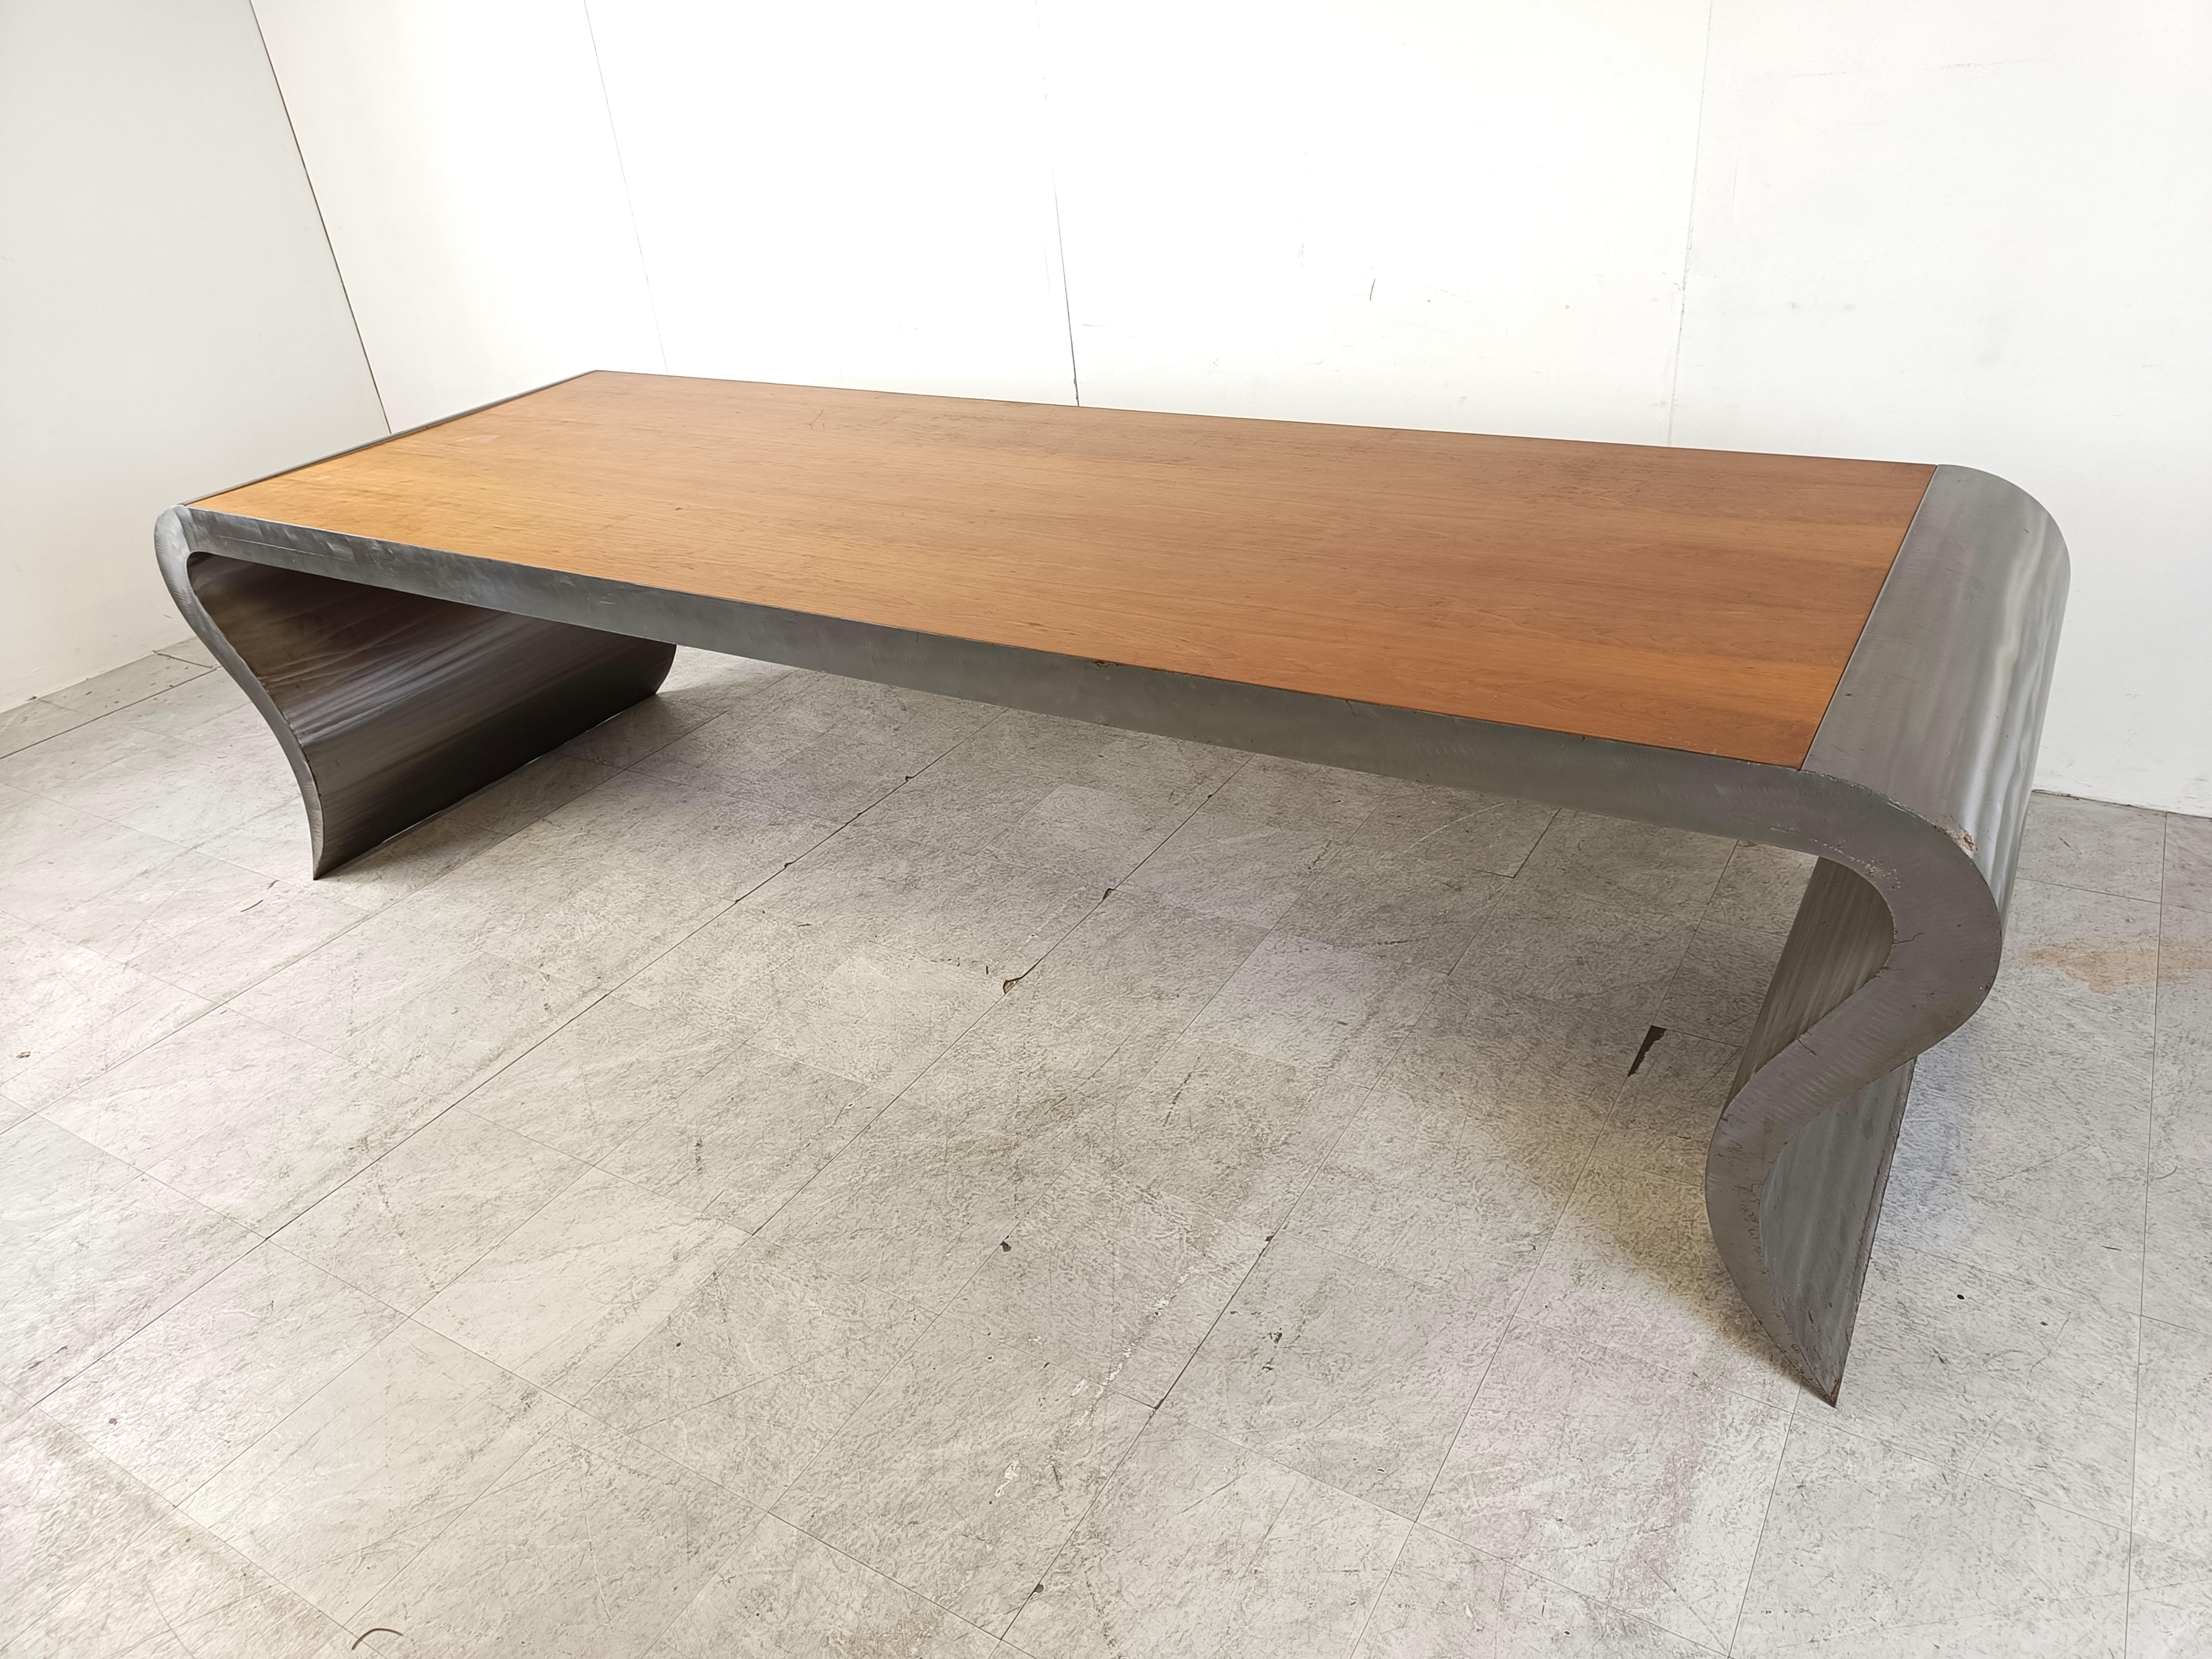 Striking and very large dining table or desk made from a solid wooden top and a brushed aluminum frame with unique curved legs.

Beautiful dining table which really is an eye catcher.

It could also serve as a very unique desk.

1990s -